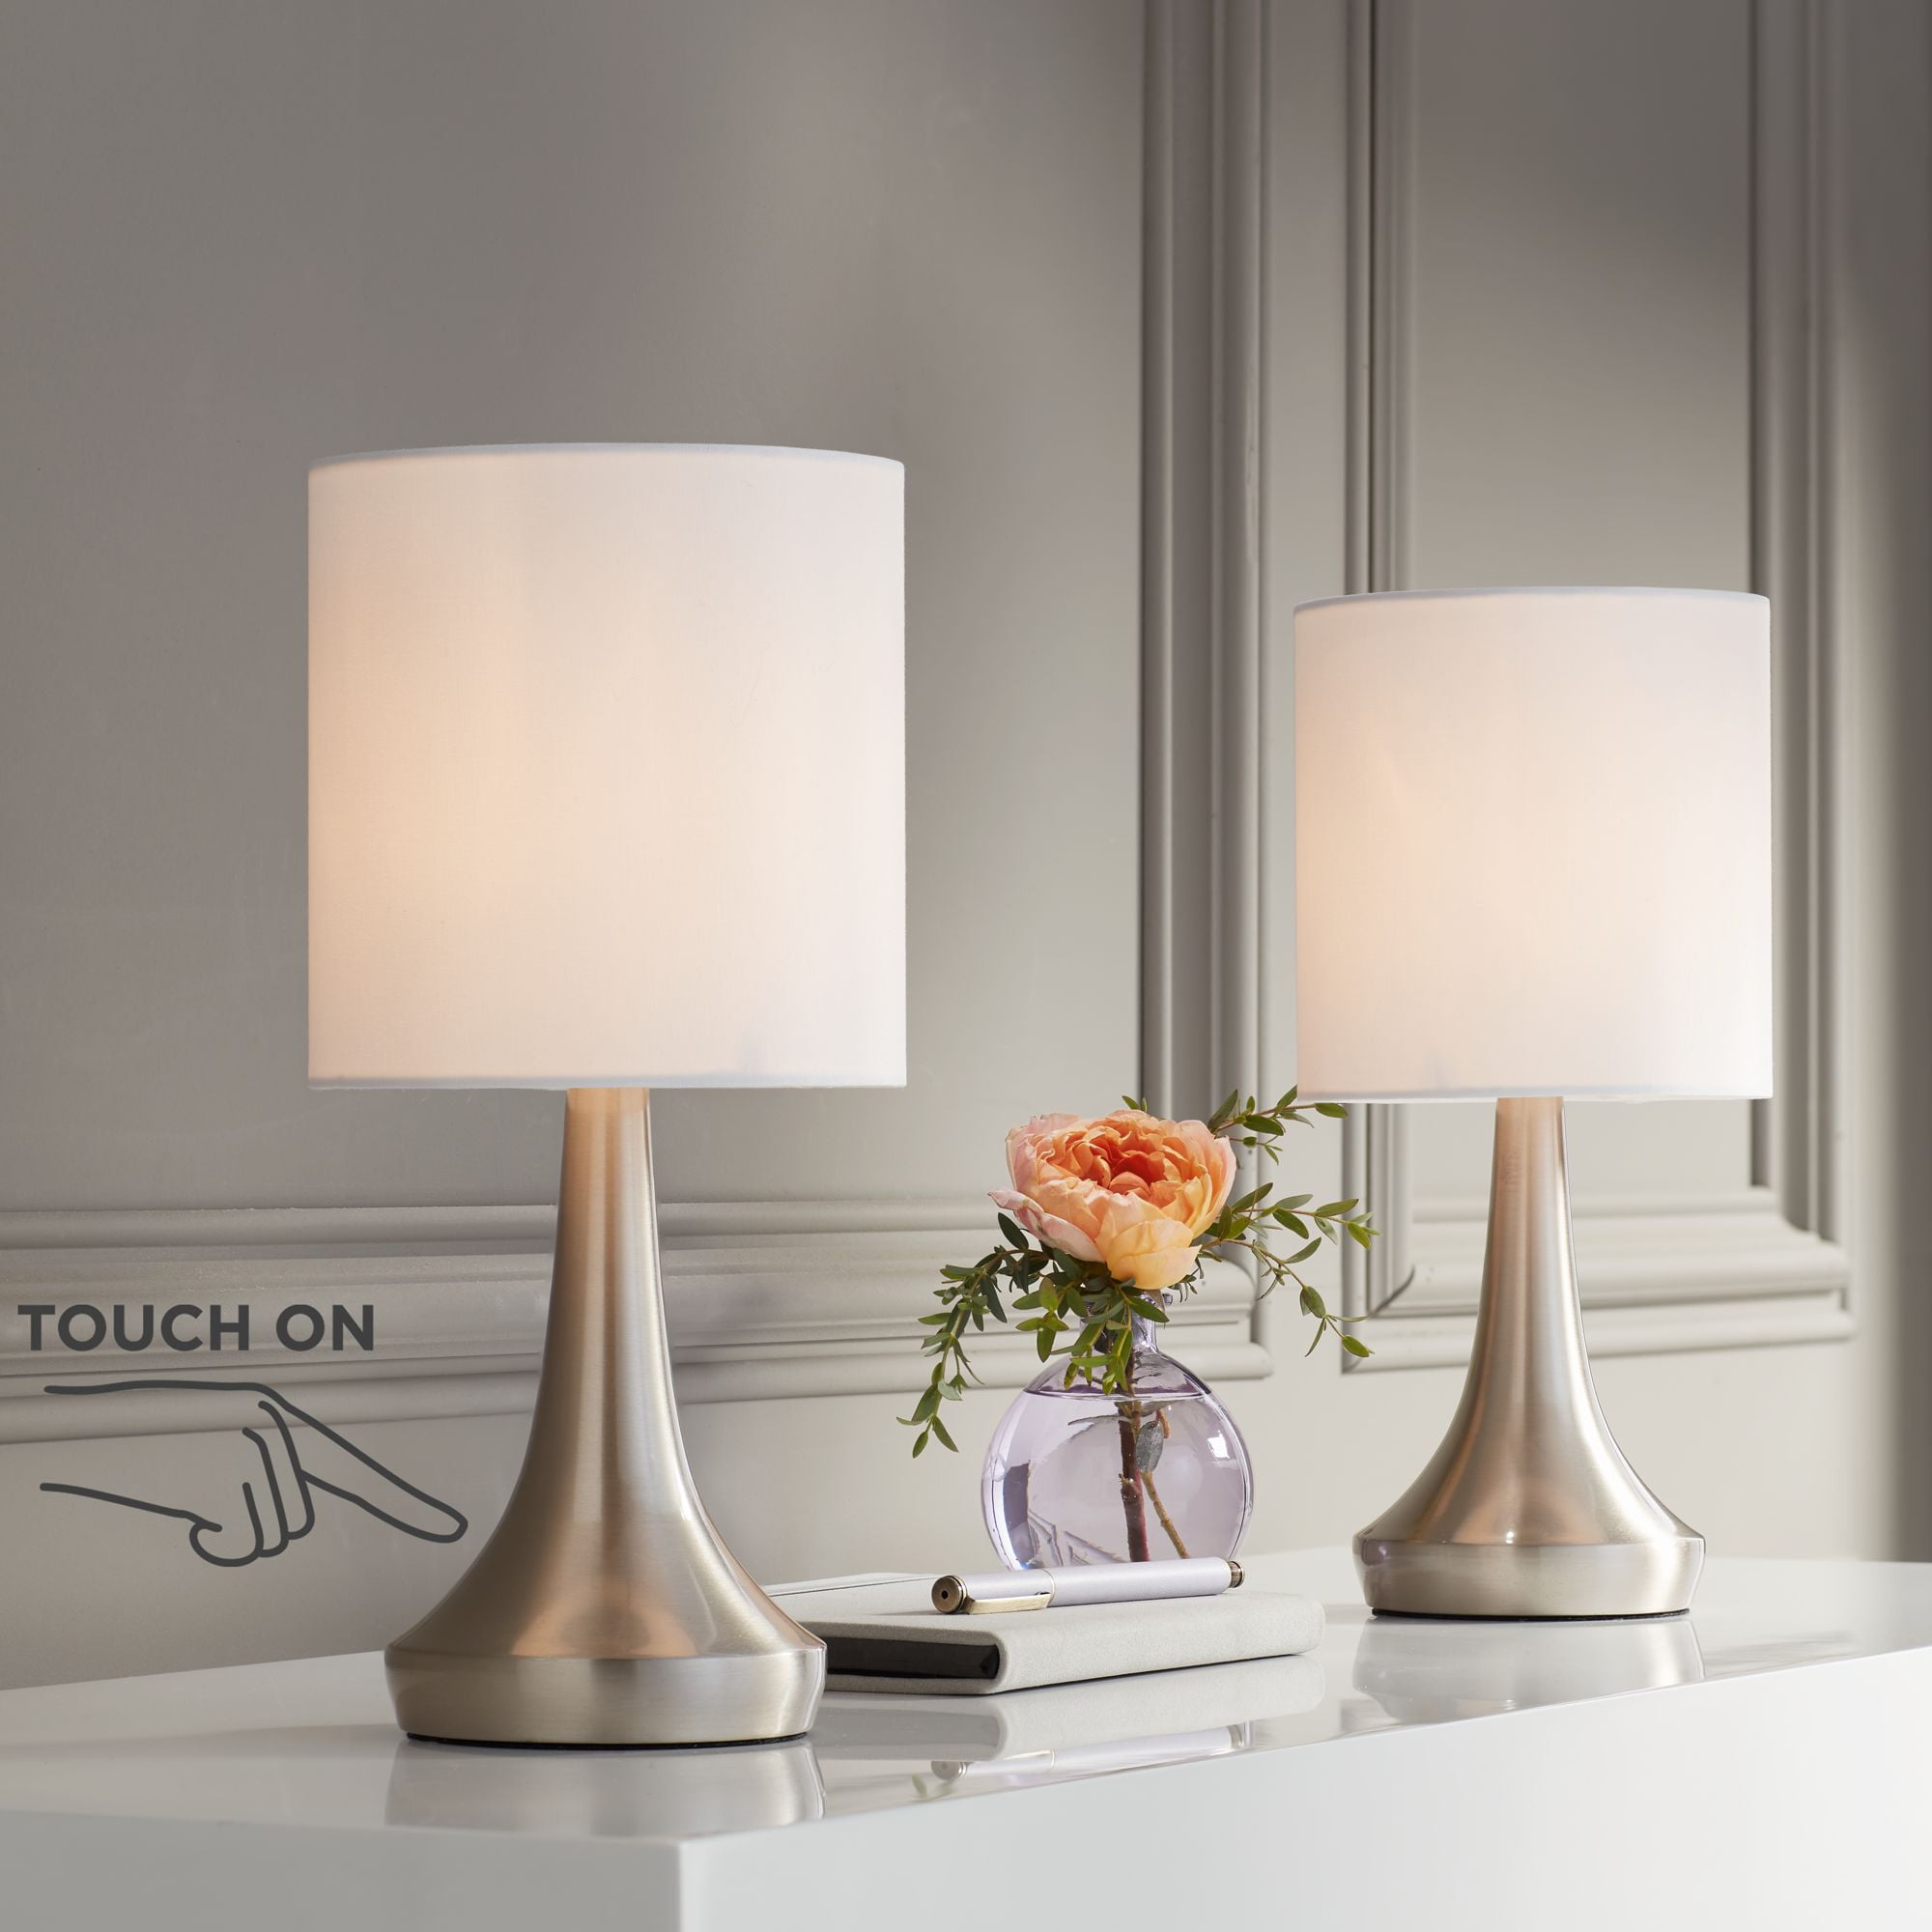 Pair of Modern Brushed Chrome Bedside Touch Table Lamps with Grey Shades 